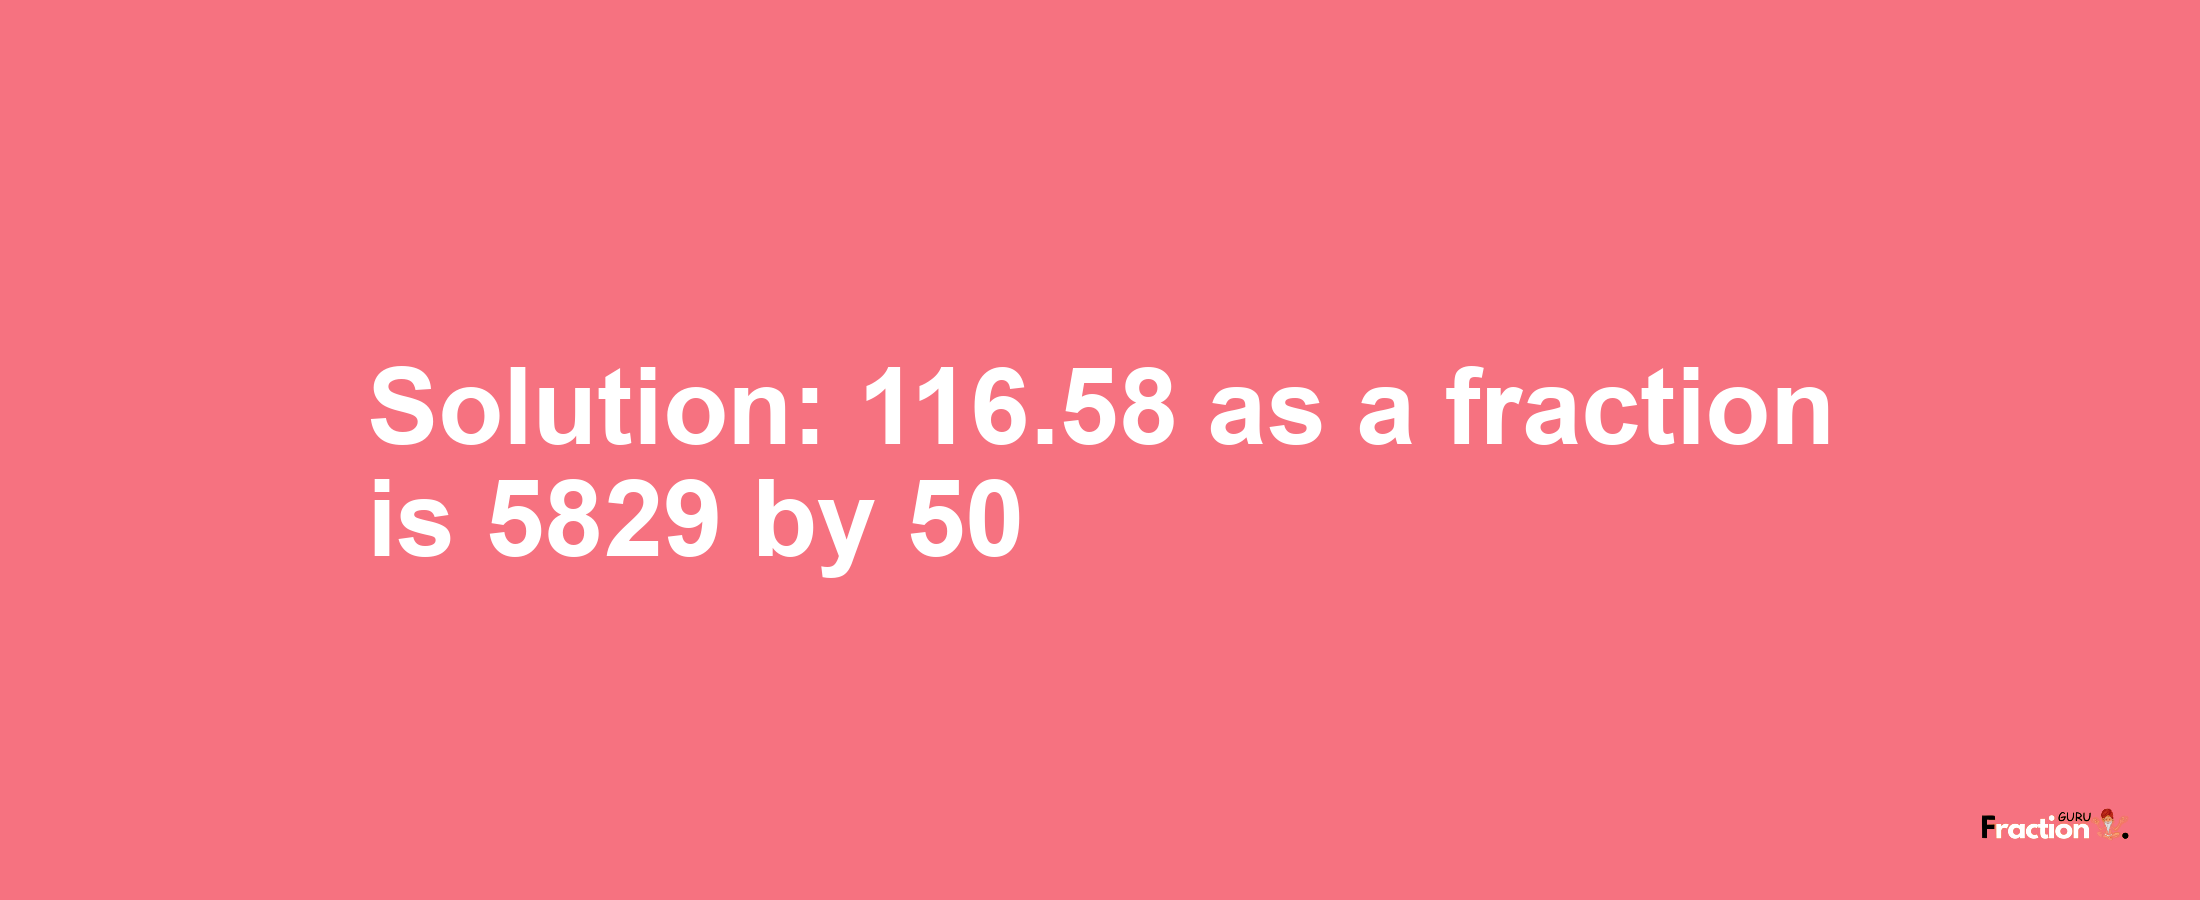 Solution:116.58 as a fraction is 5829/50